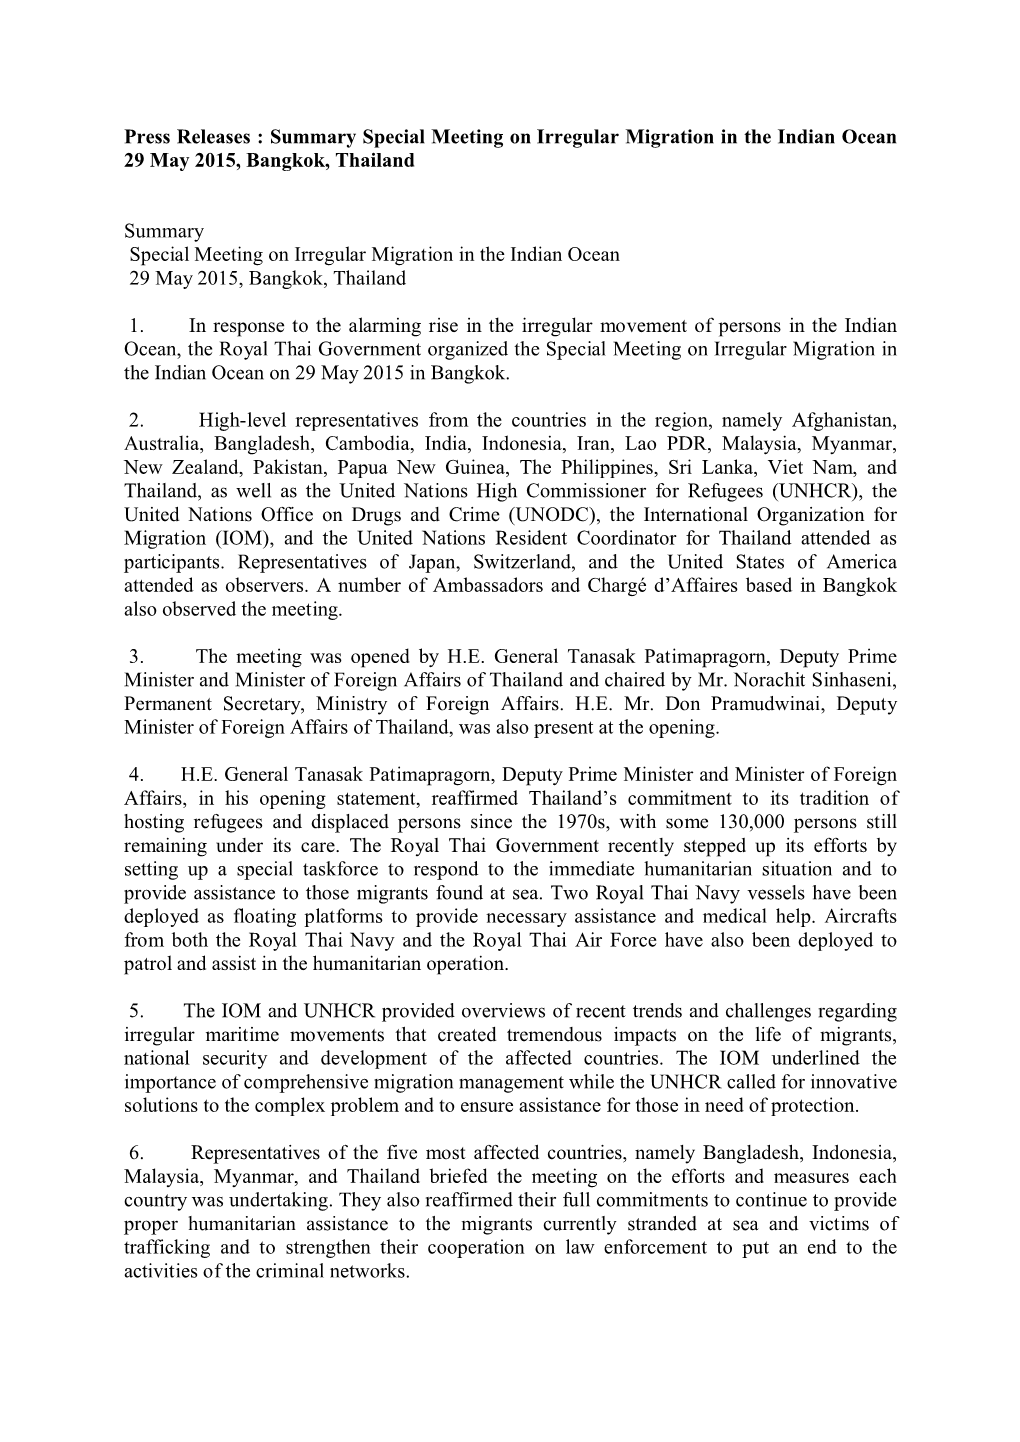 Press Releases : Summary Special Meeting on Irregular Migration in the Indian Ocean 29 May 2015, Bangkok, Thailand